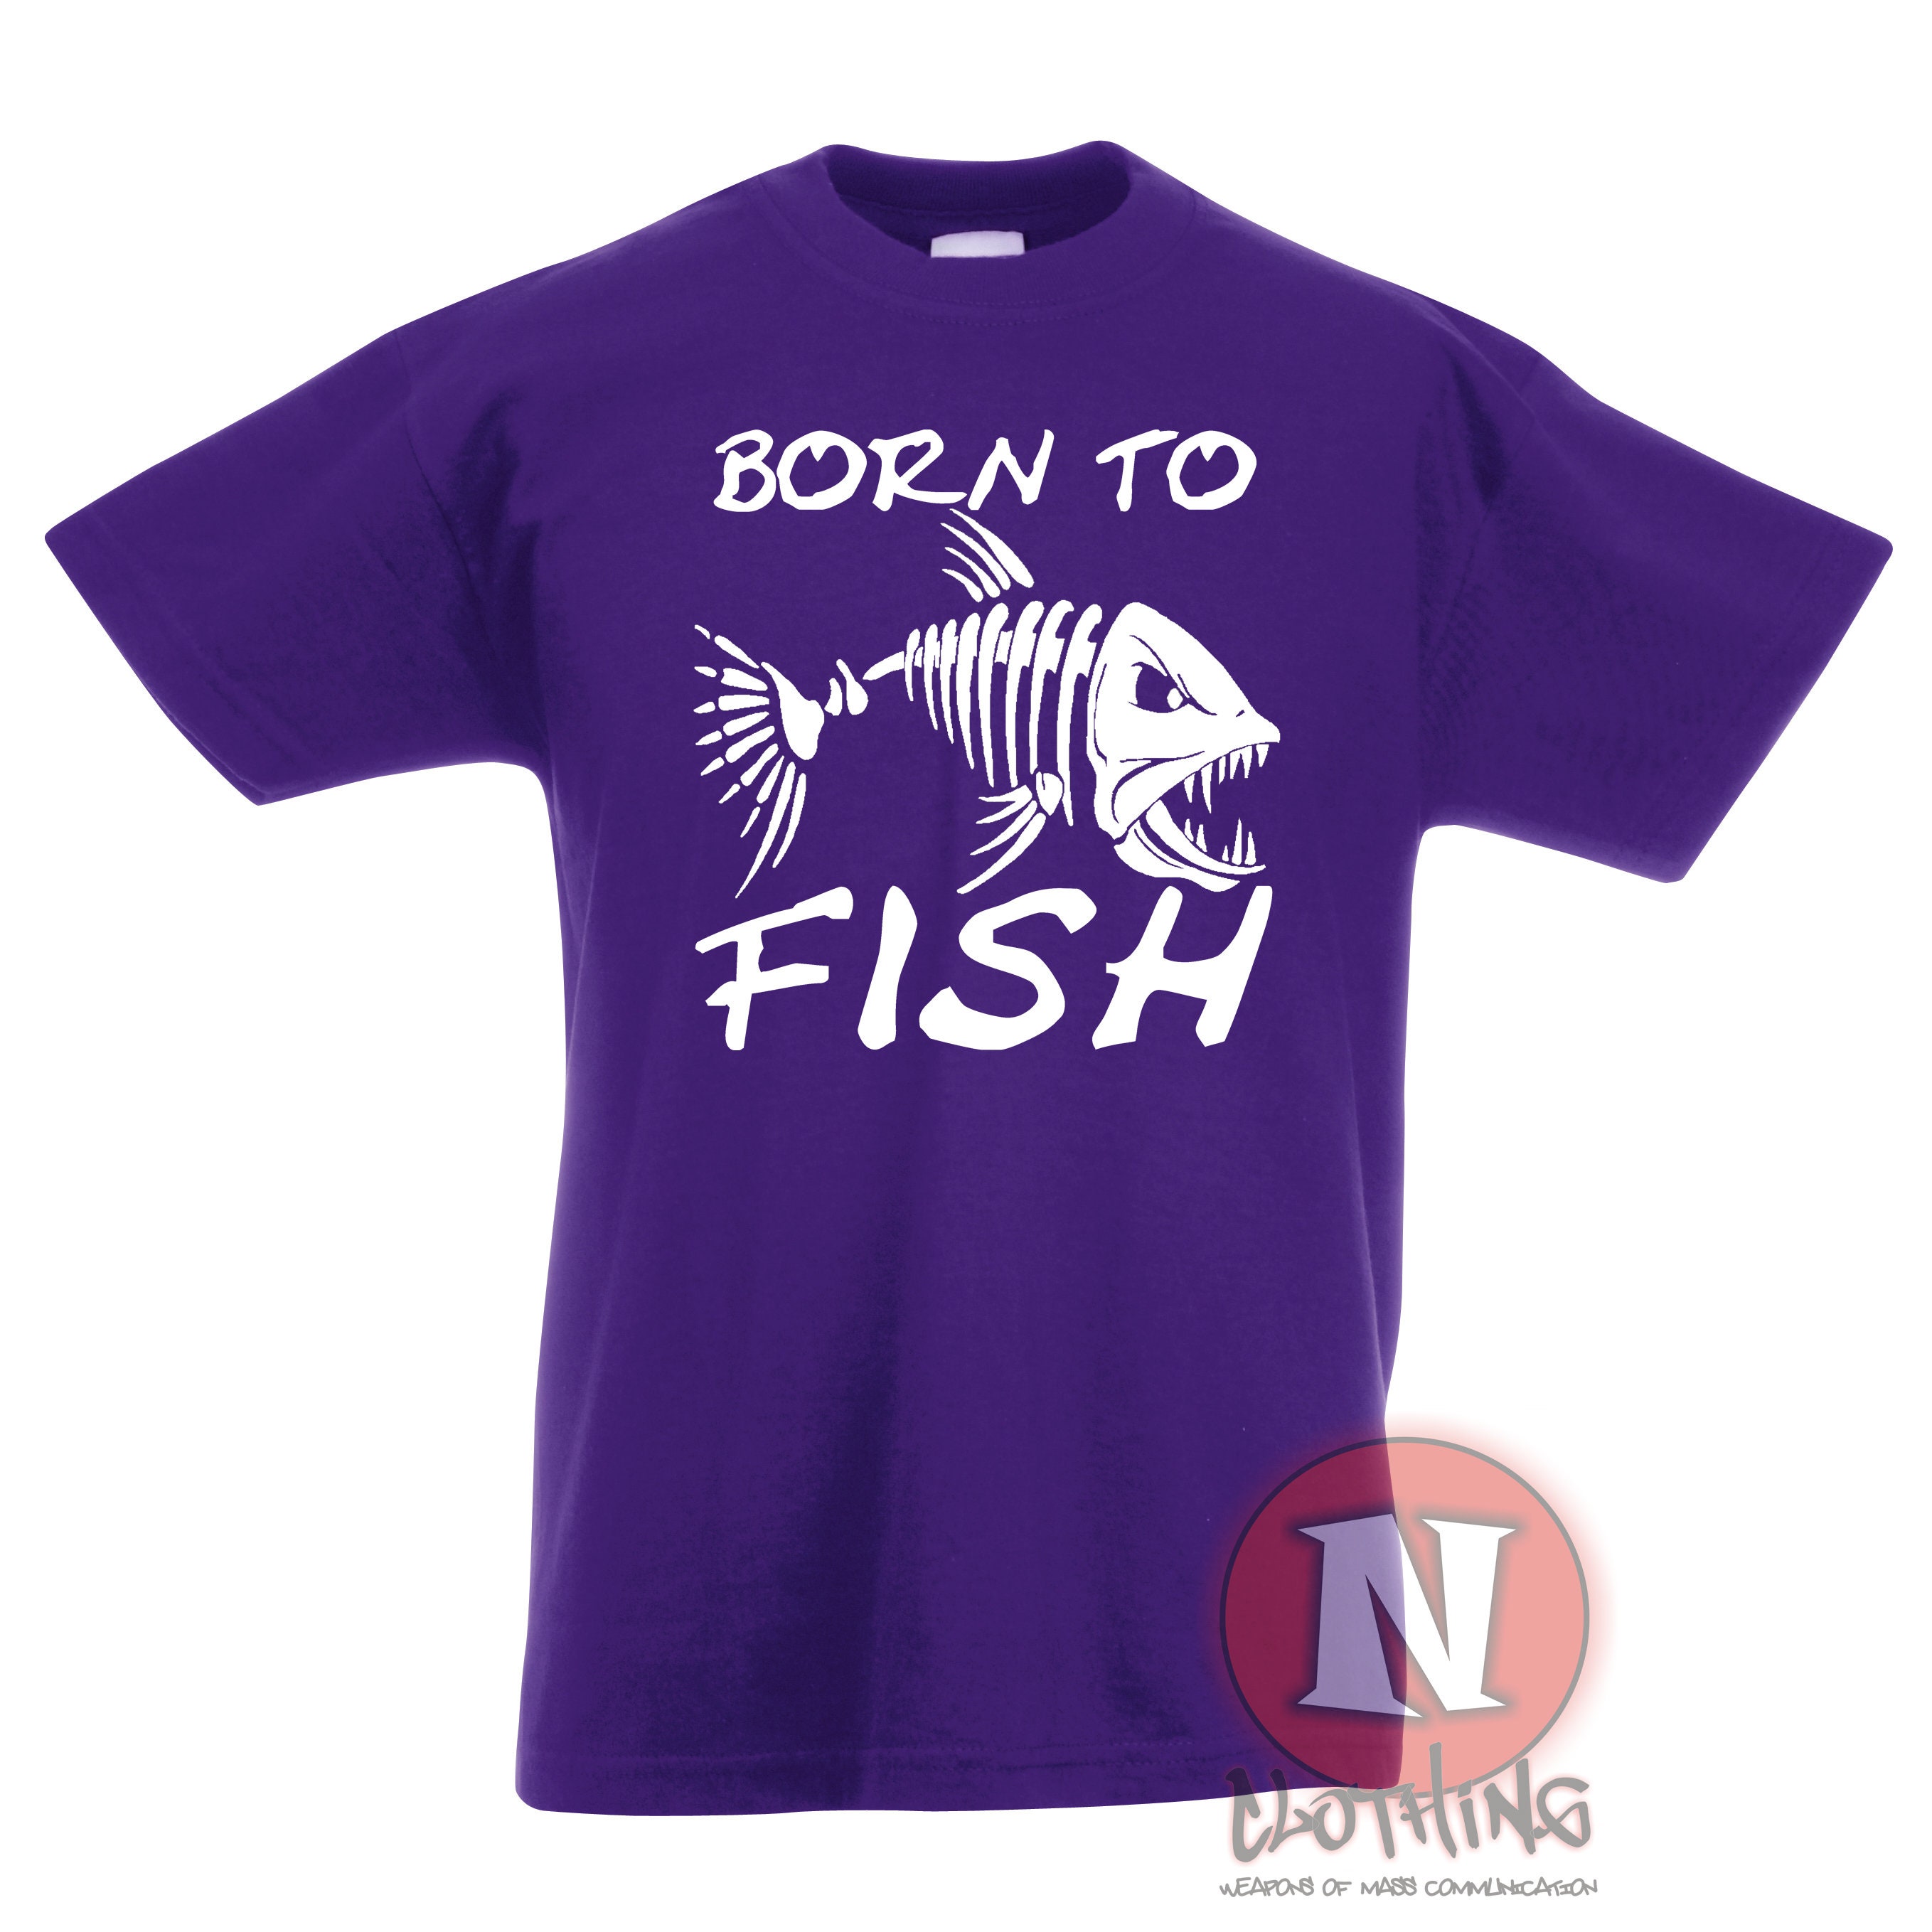 Born to Fish Children's T-shirt. Ideal for Young Anglers. 100% Cotton